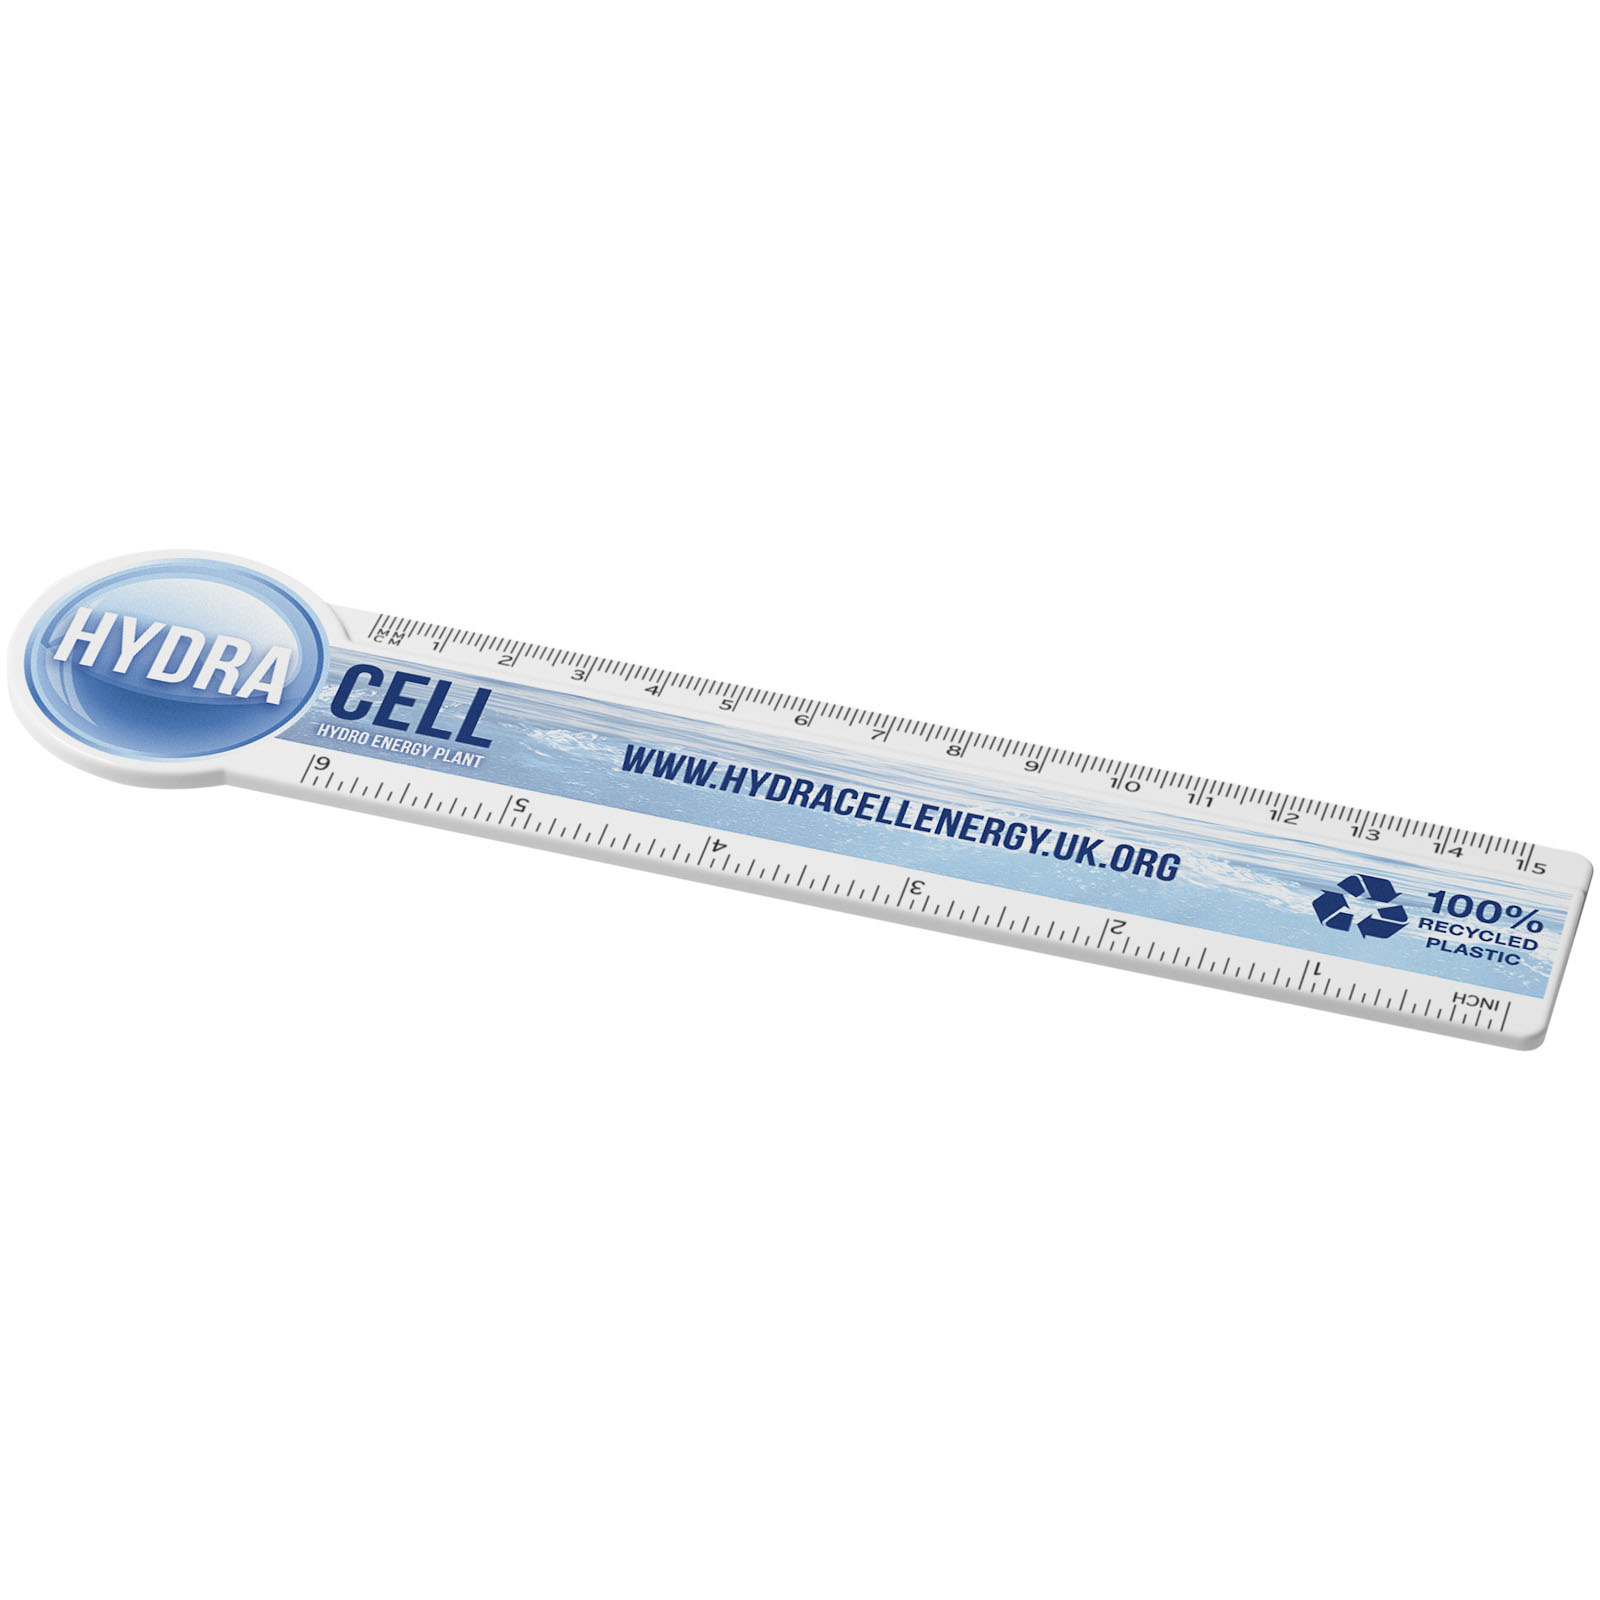 Advertising Desk Accessories - Tait 15 cm circle-shaped recycled plastic ruler 